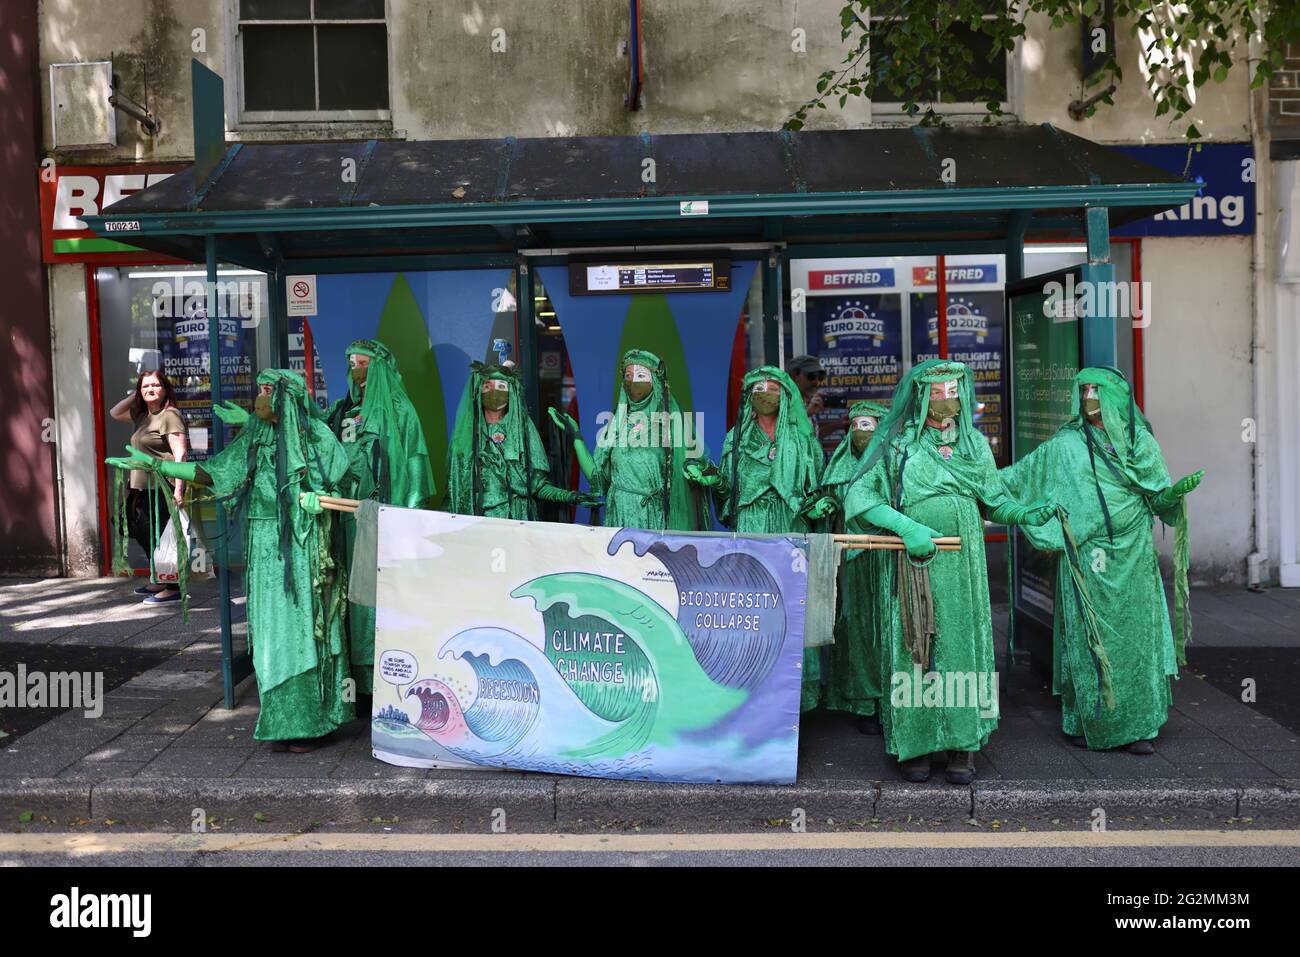 Extinction Rebellion demonstrators hold a placard as they protest in Falmouth, during the G7 summit in Cornwall, Britain, June 12, 2021. REUTERS/Tom Nicholson Stock Photo